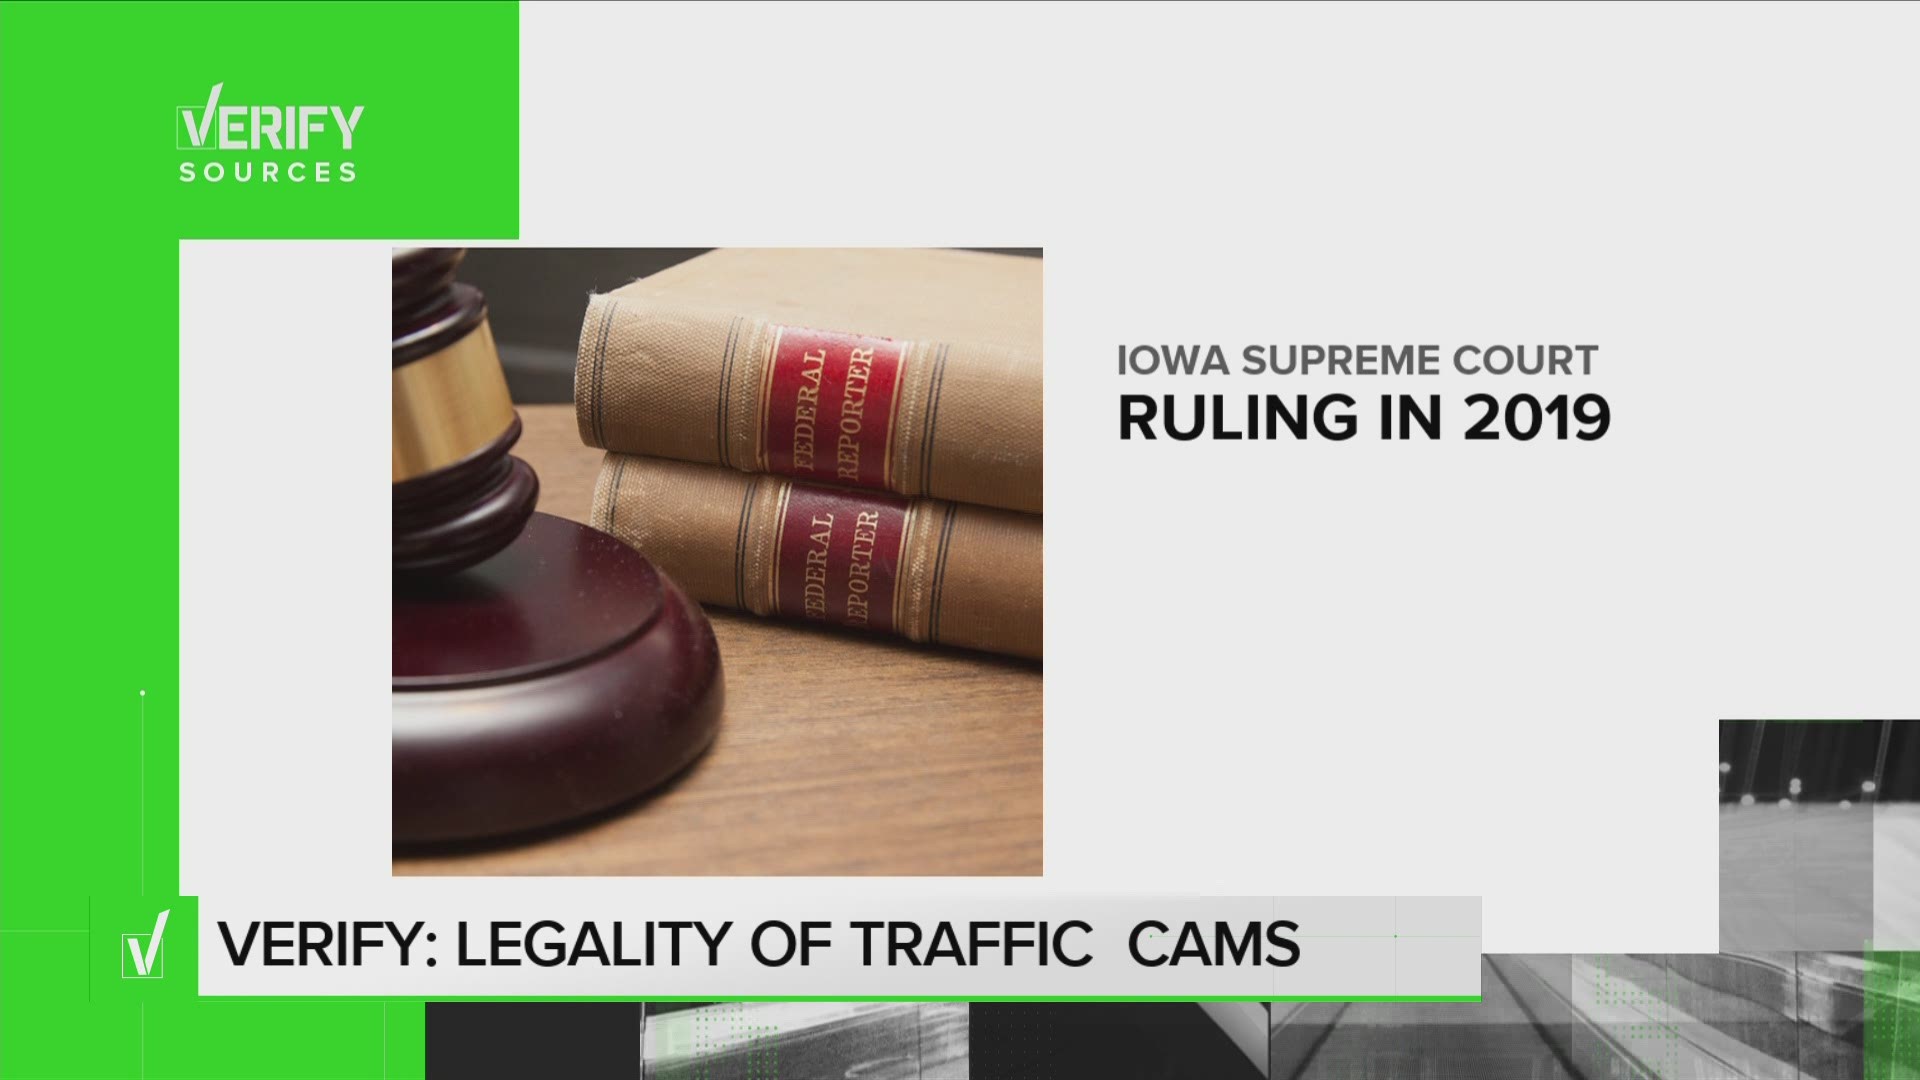 In 2019, the Iowa Supreme Court found that speed cameras along highways, interstates and city roads do not violate a driver's due process rights.